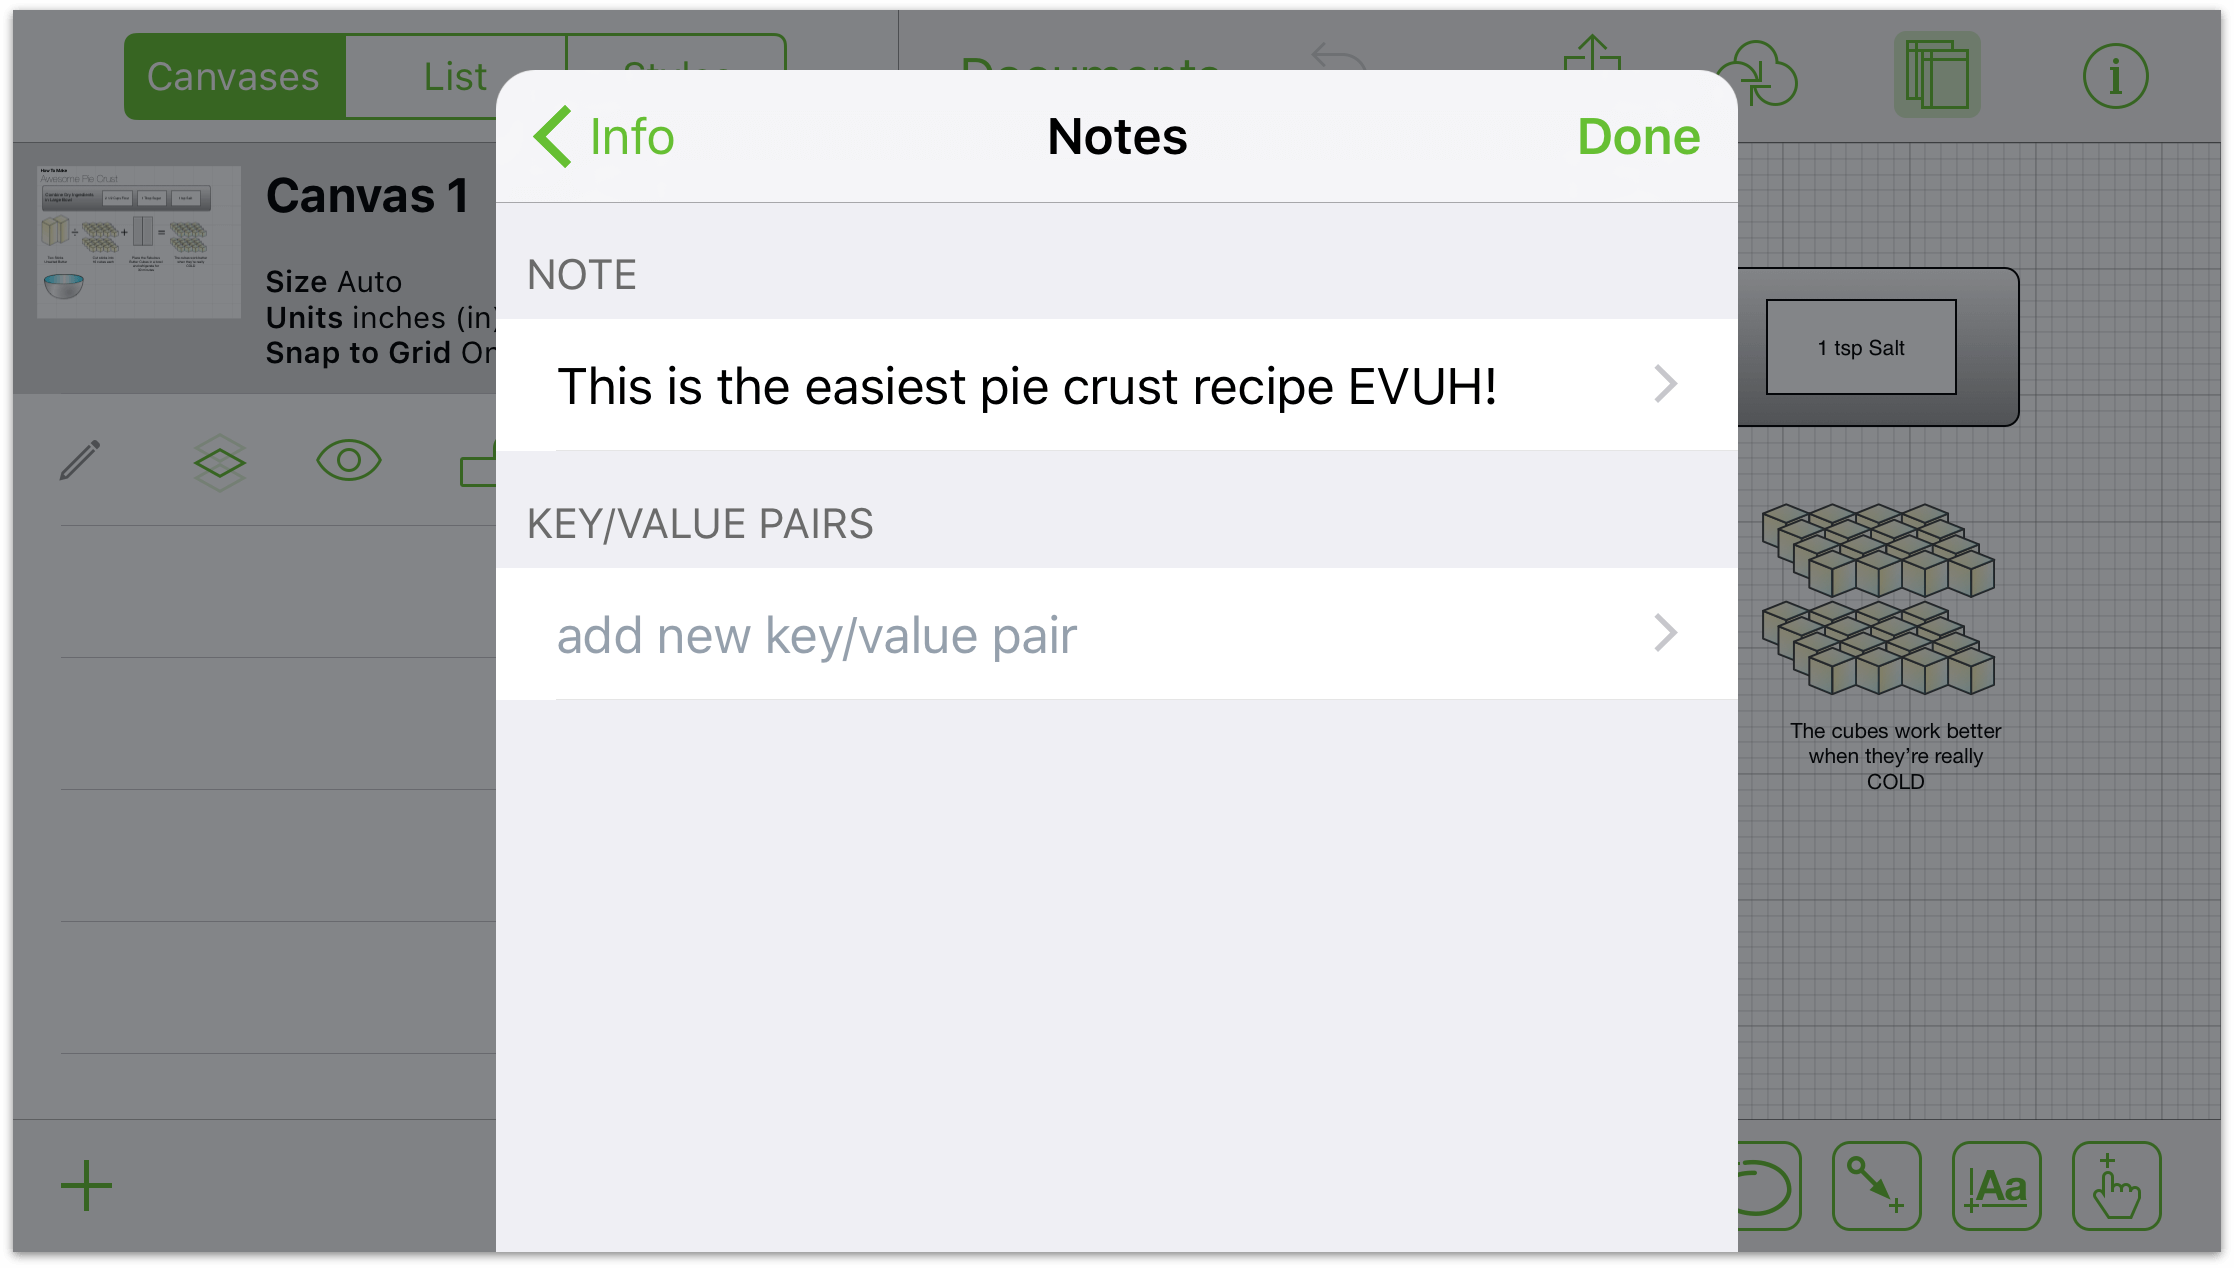 The Notes inspector